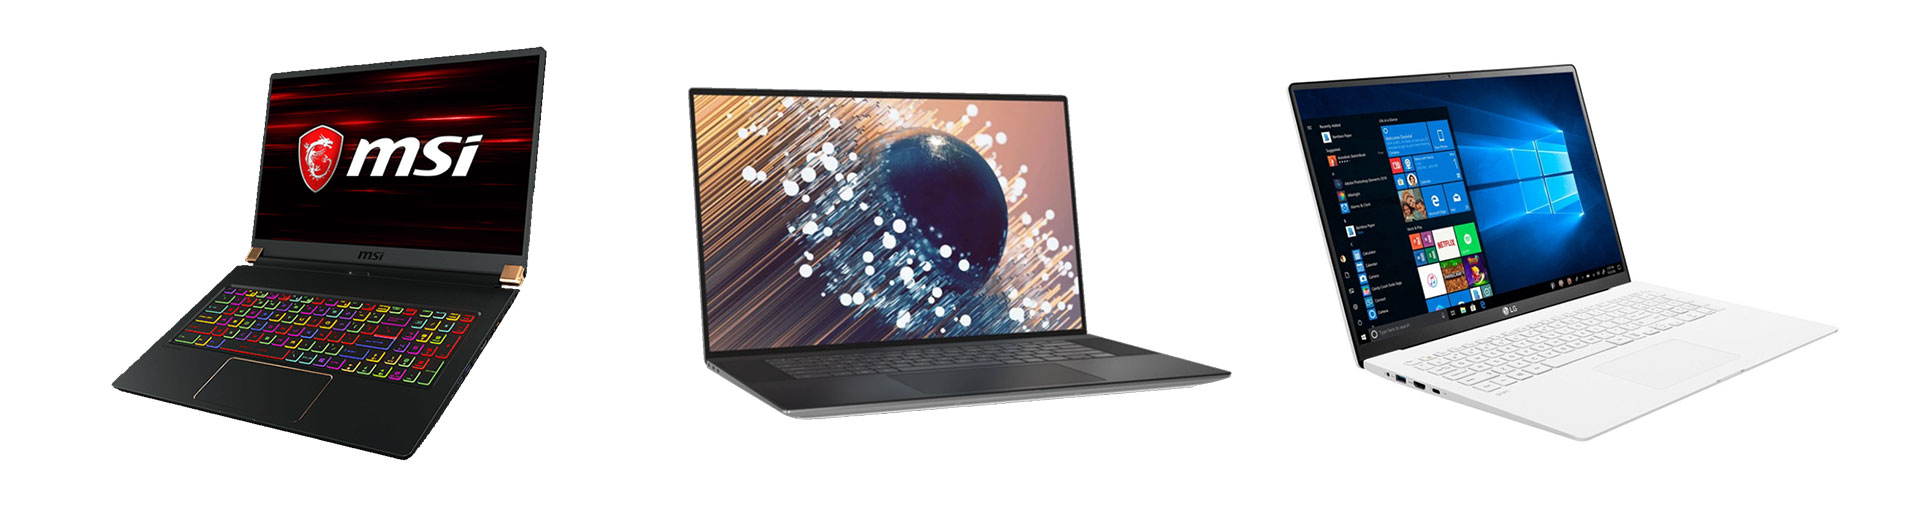 Some of the lightest 17-inch laptops: MSI GS75 Stealth, Dell XPS 17, and the LG gram 17